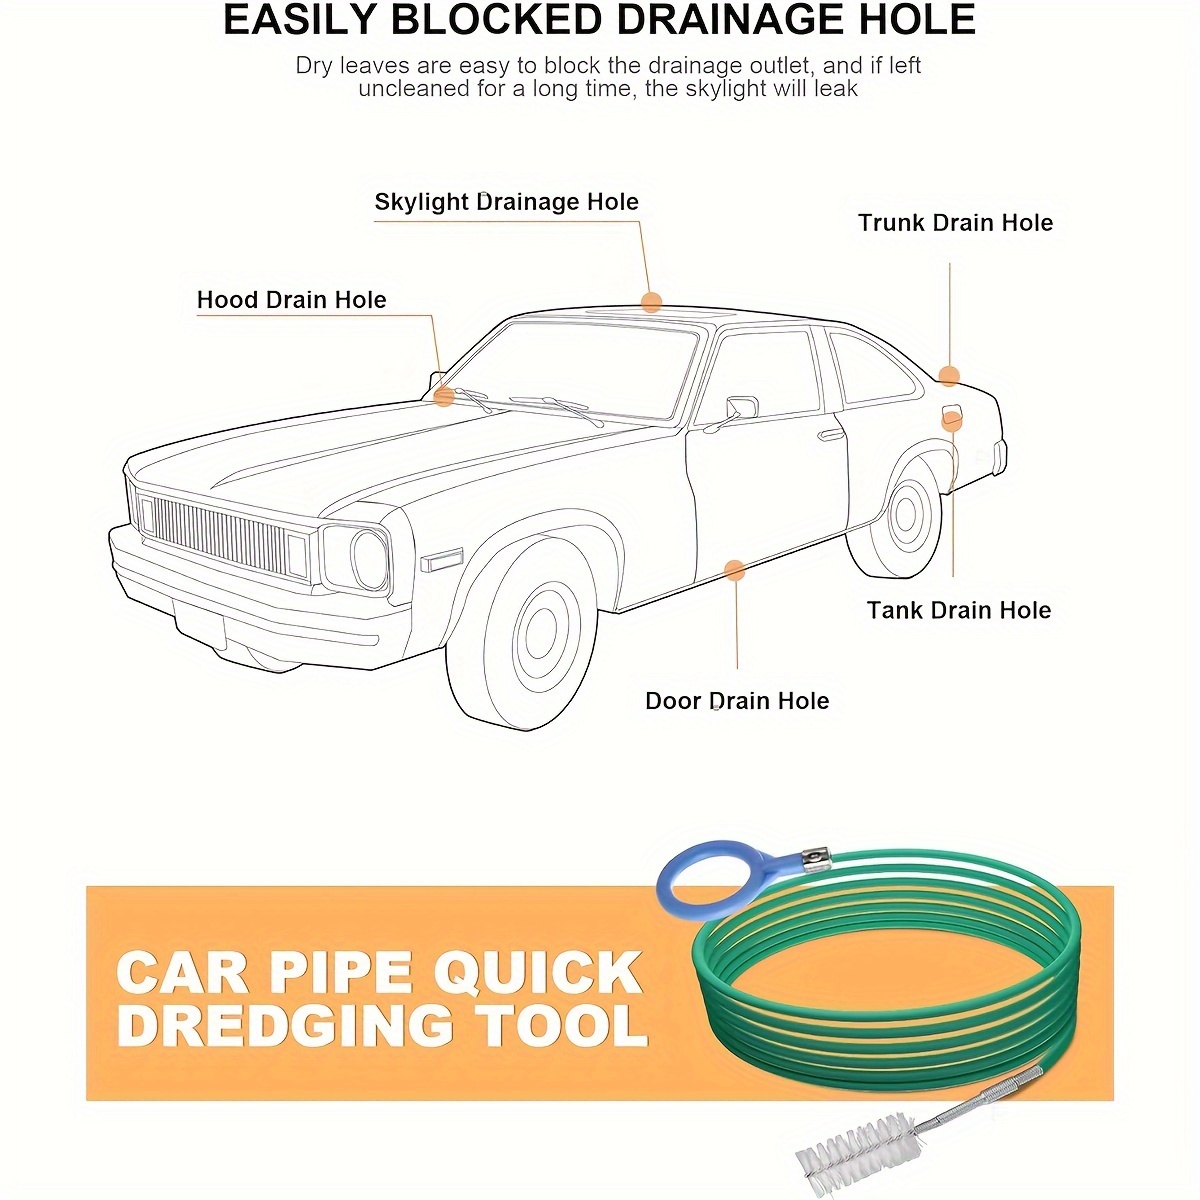 Sunroof drain cleaning tool